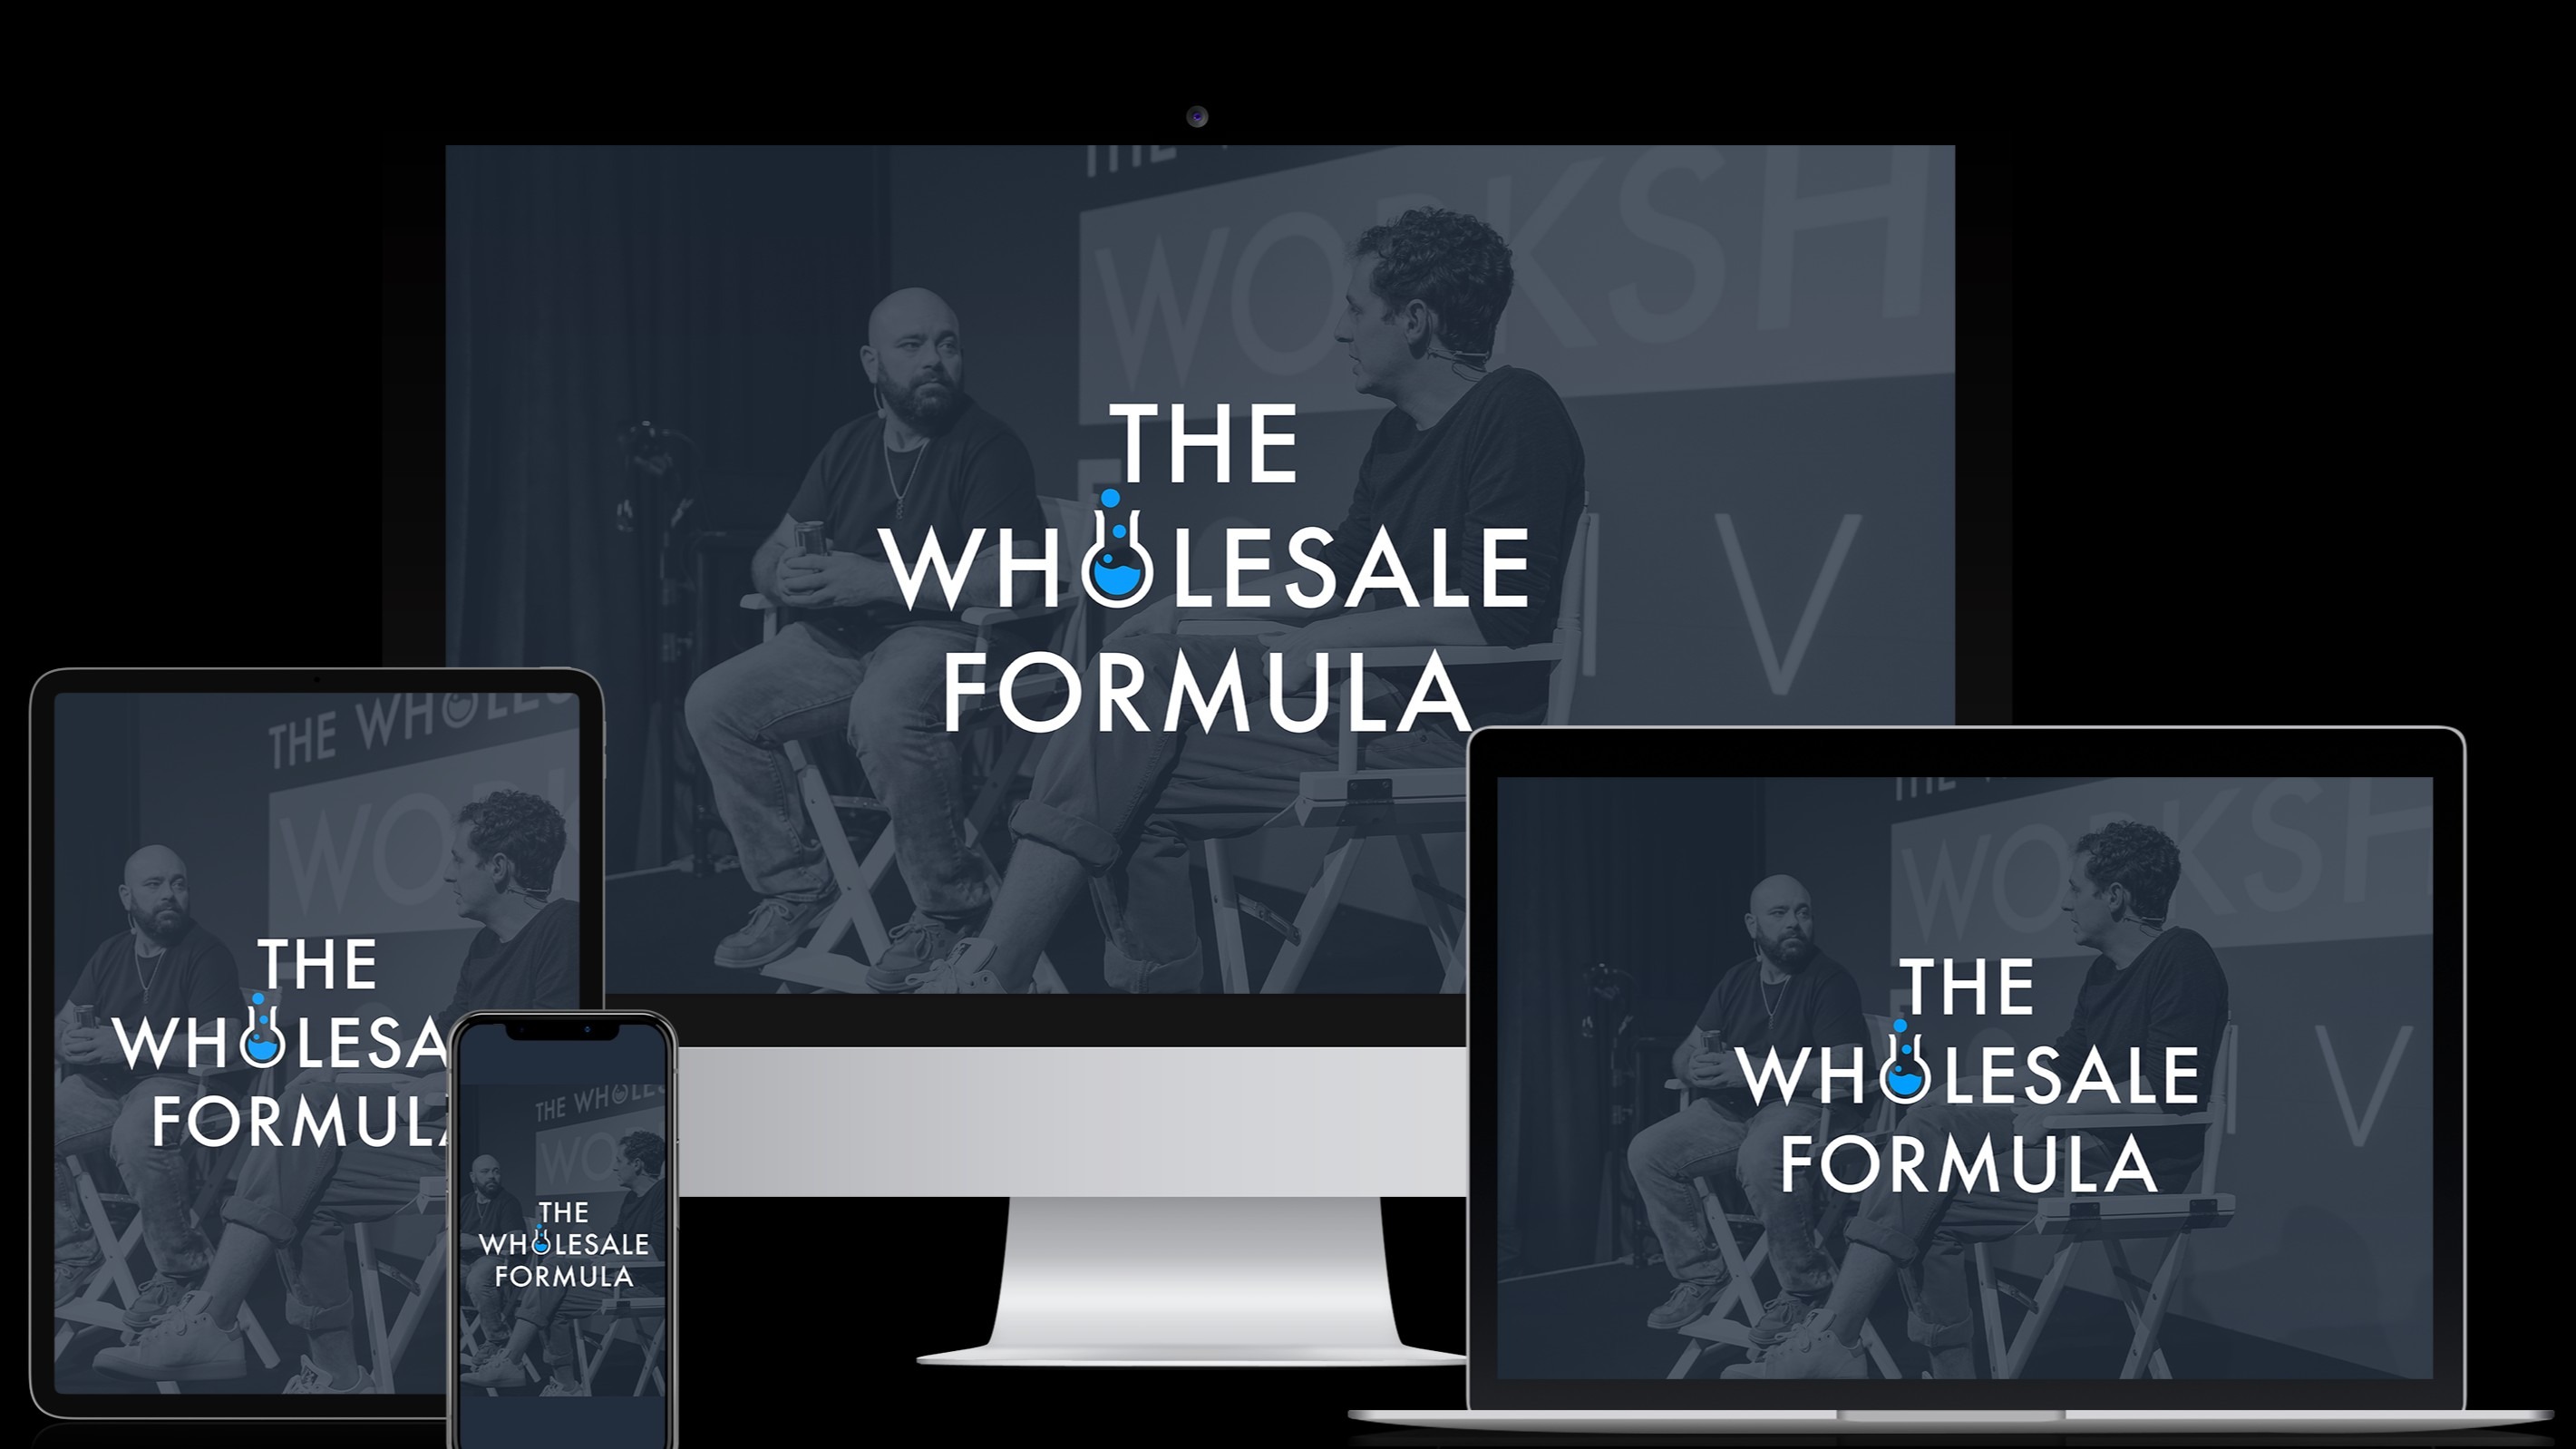 How To Make Guaranteed Income With Amazon Wholesaling & The Wholesale Formula